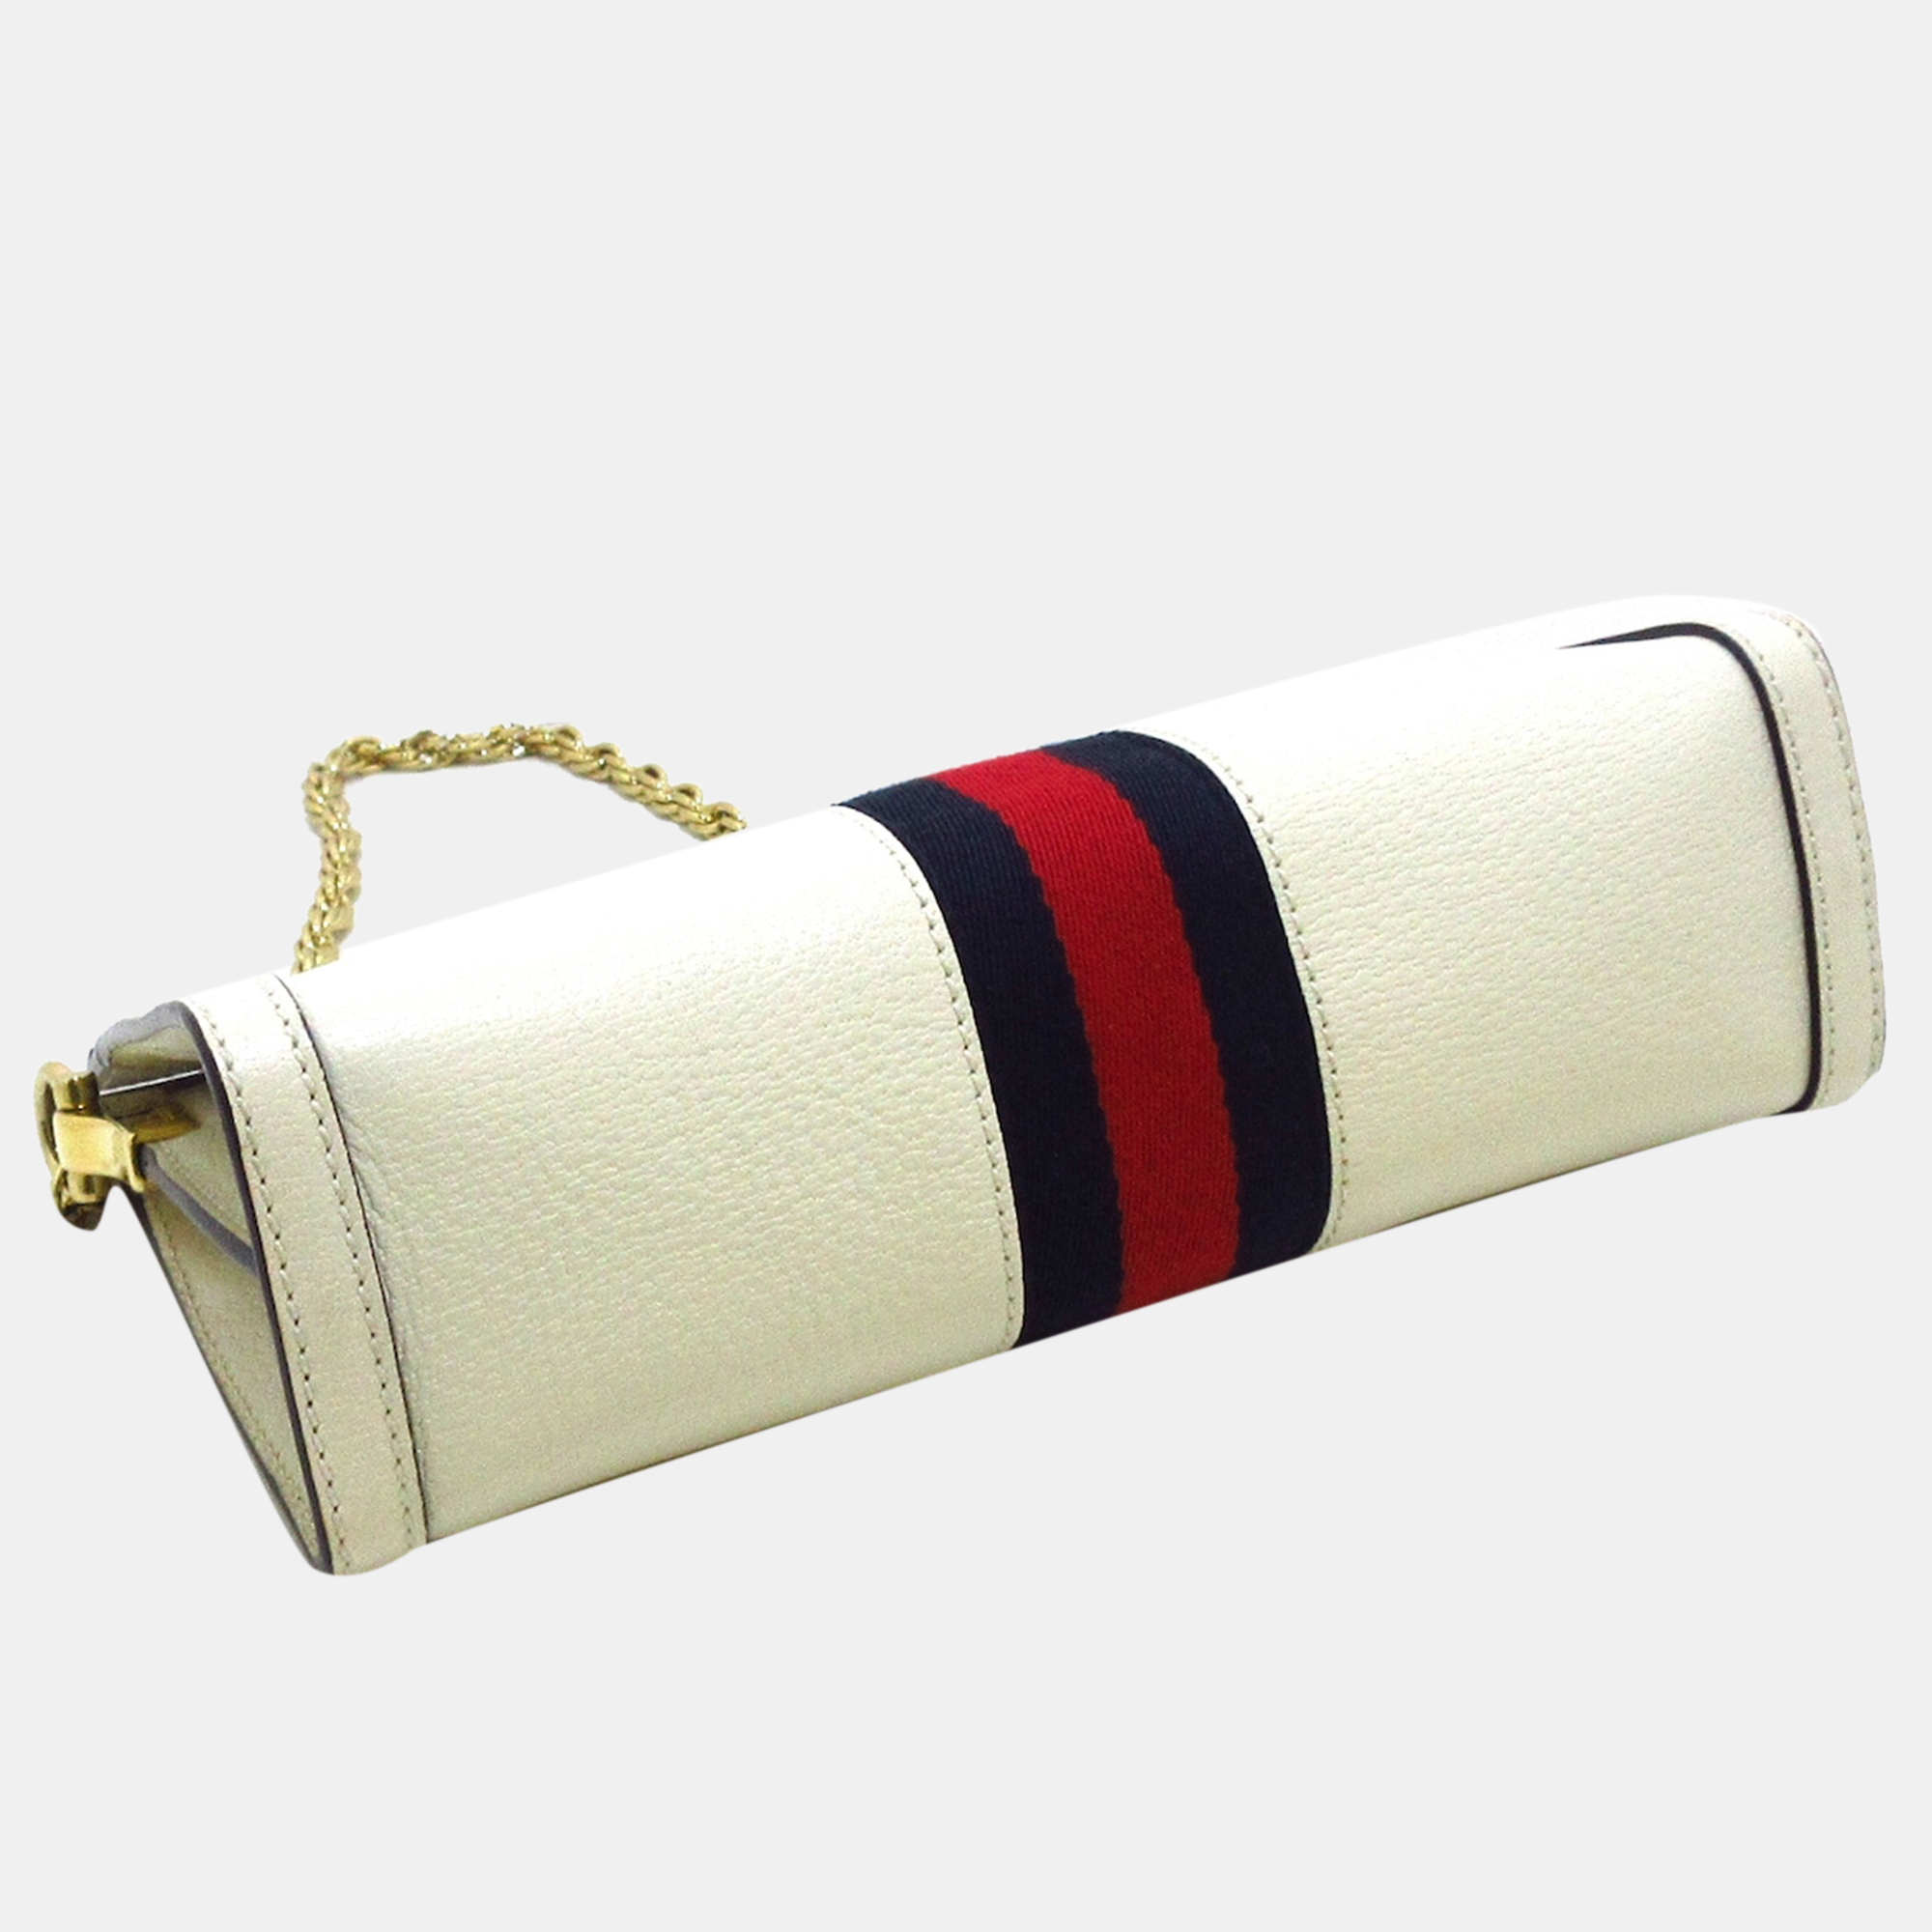 Gucci White Leather Ophidia Shoulder Bag